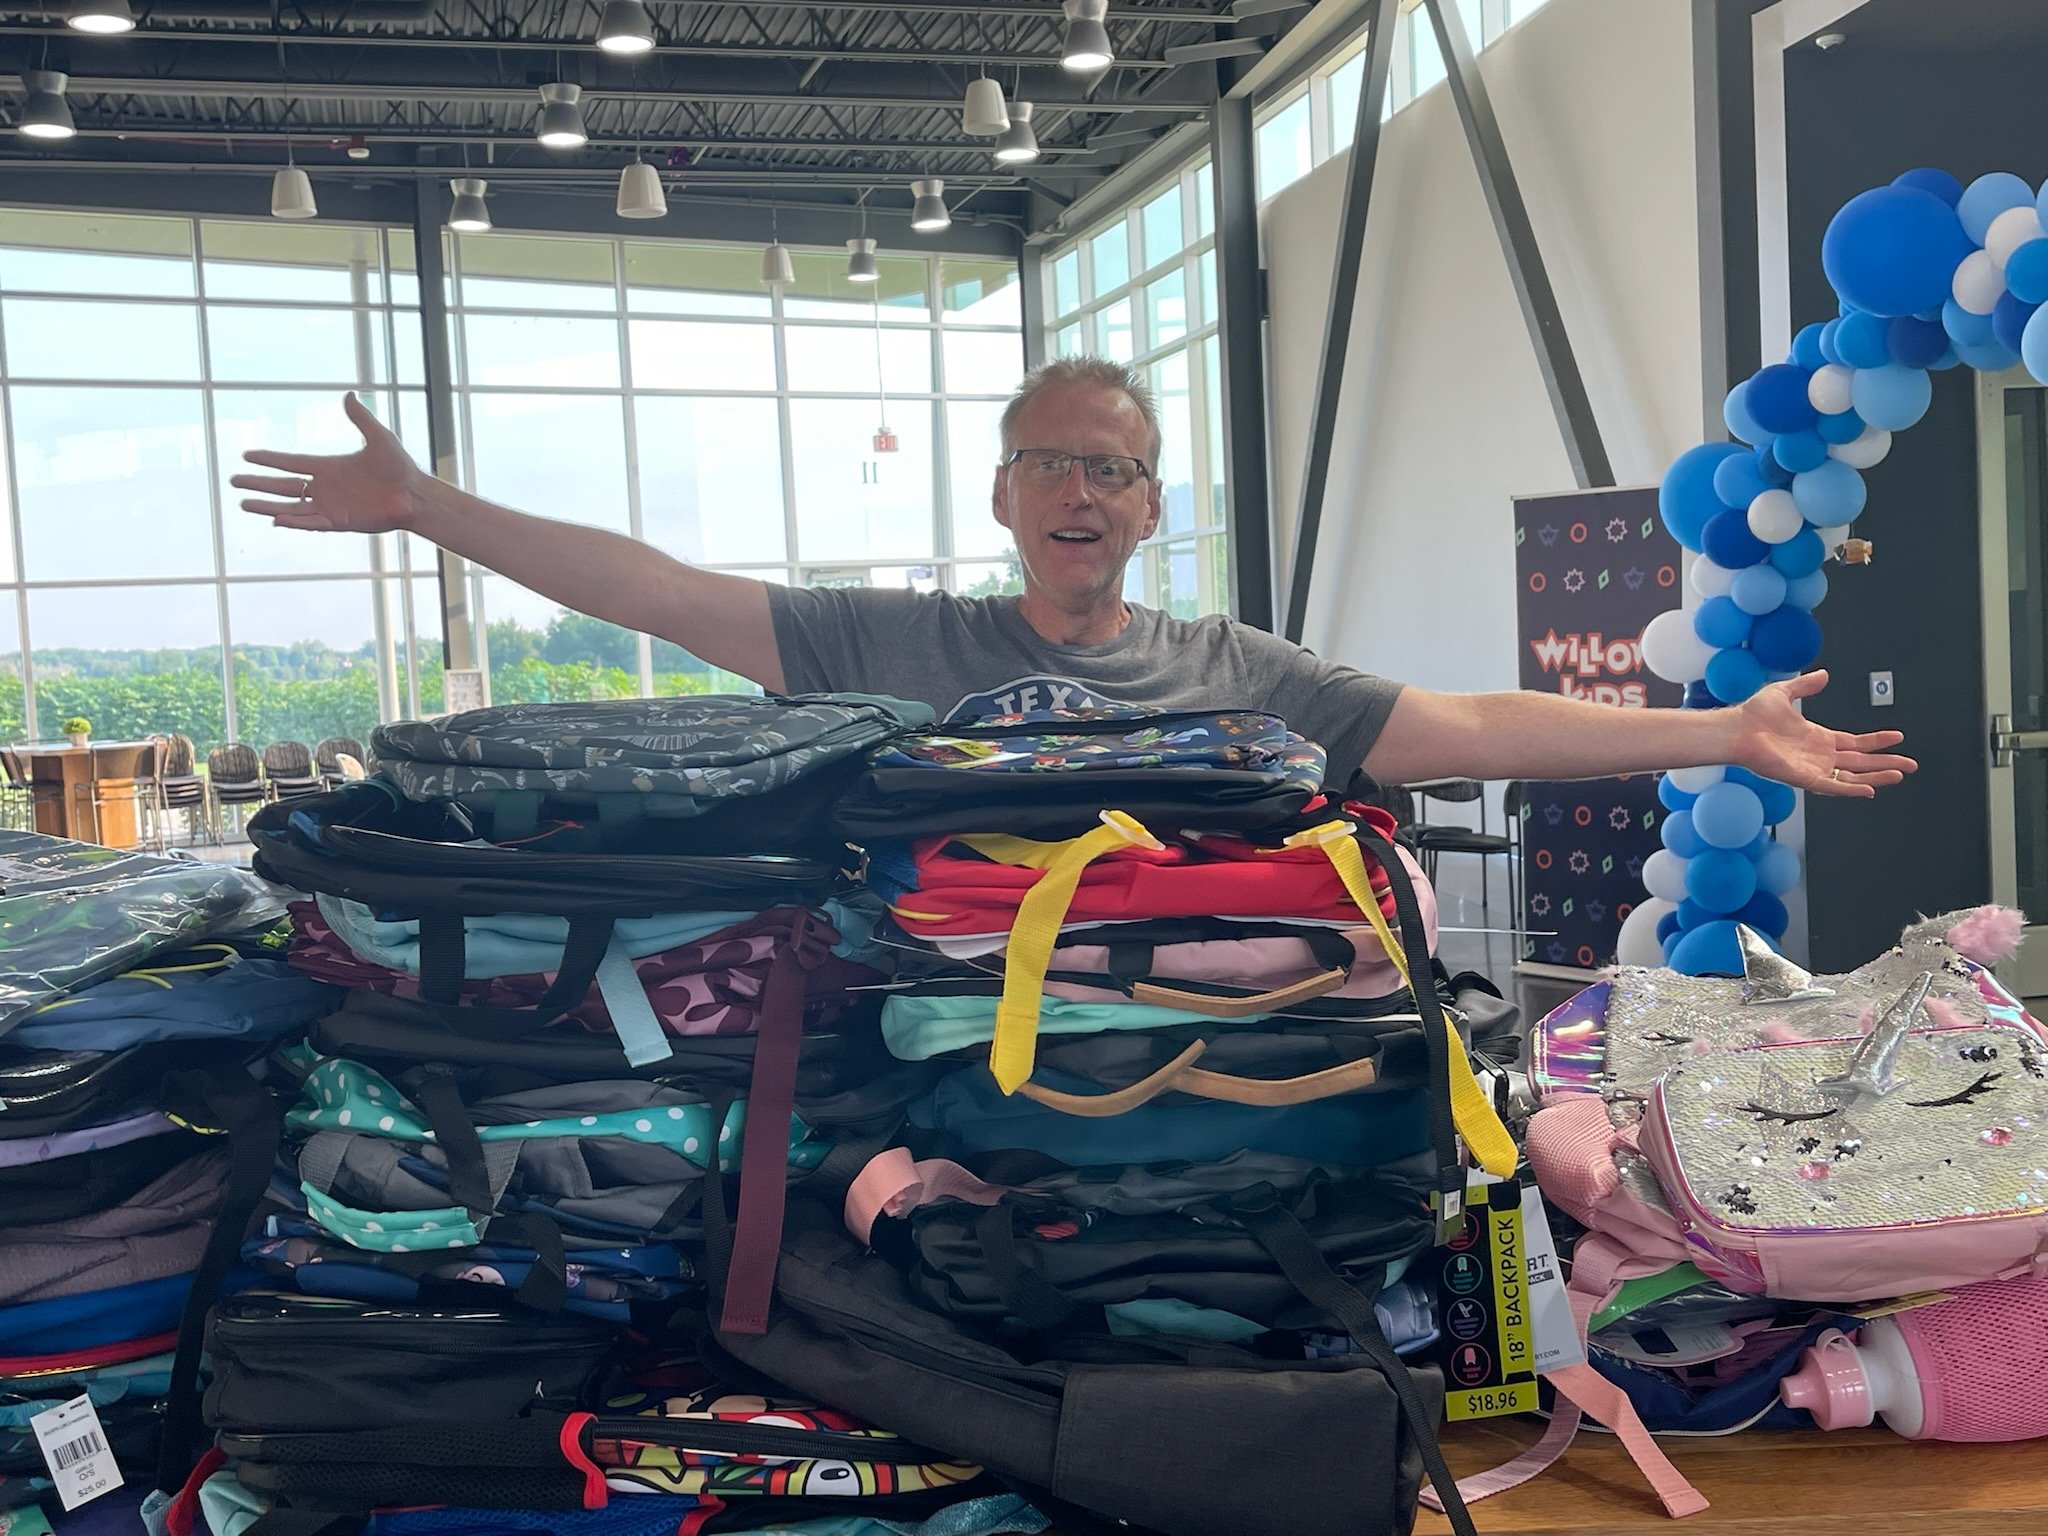 Amazing donation of backpacks and school supplies from Willow Creek of Huntley!